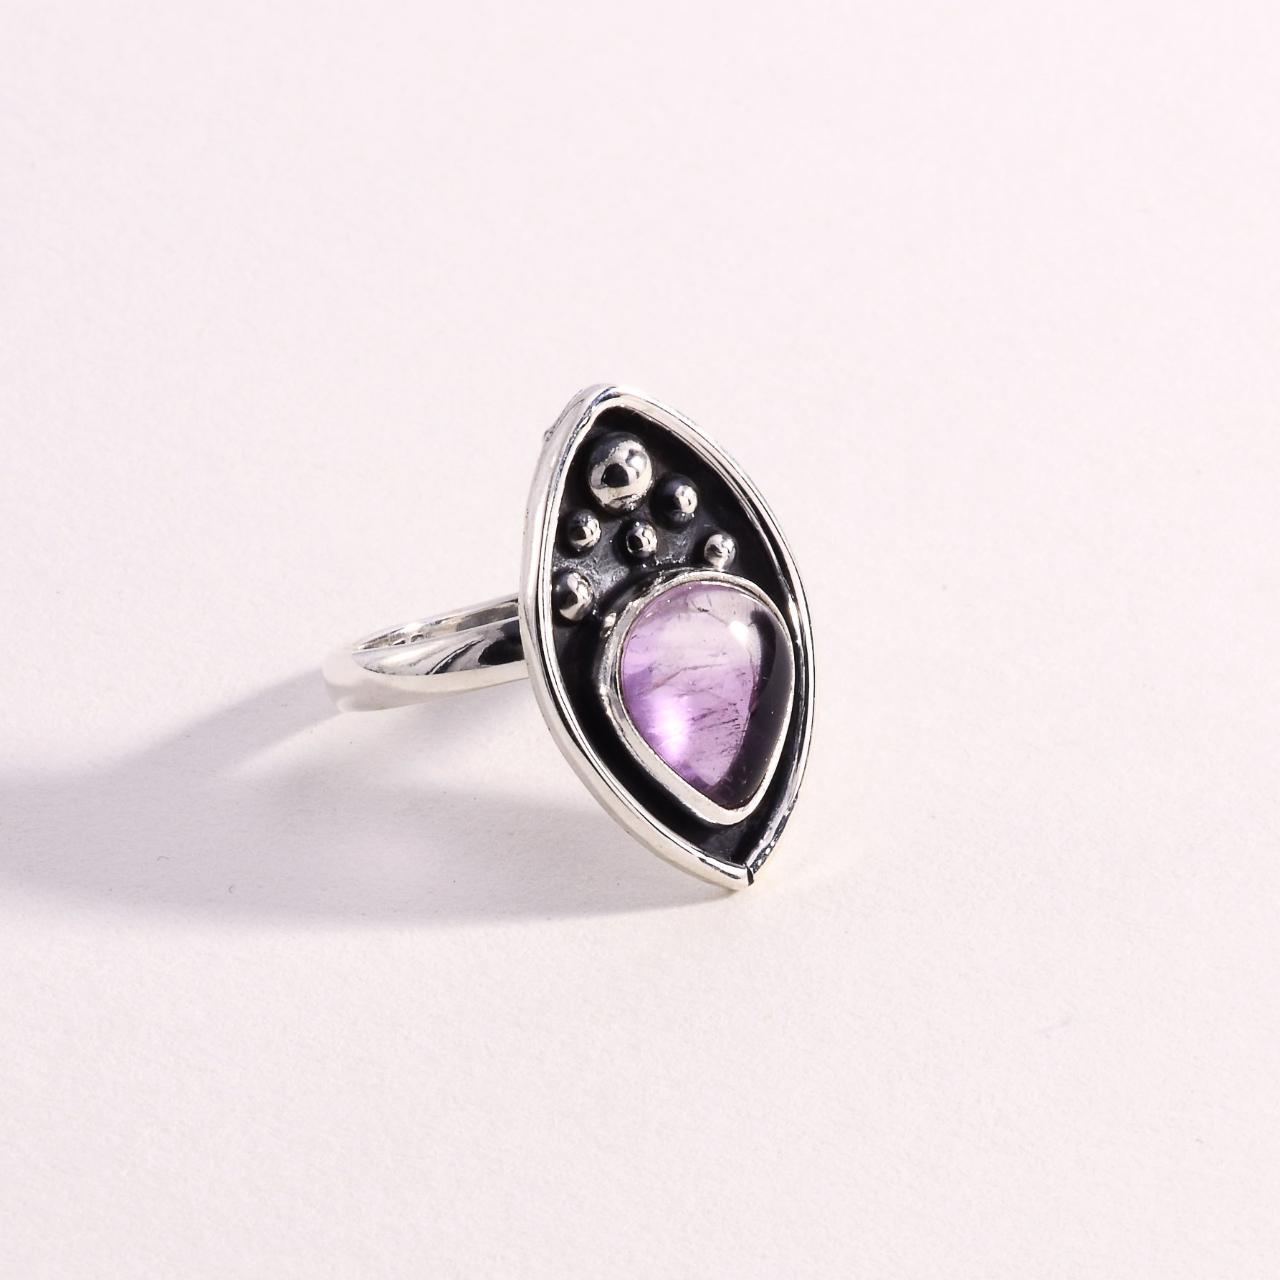 Product Image 1 - Sterling 925 Amethyst Ring

Sterling Silver

Size